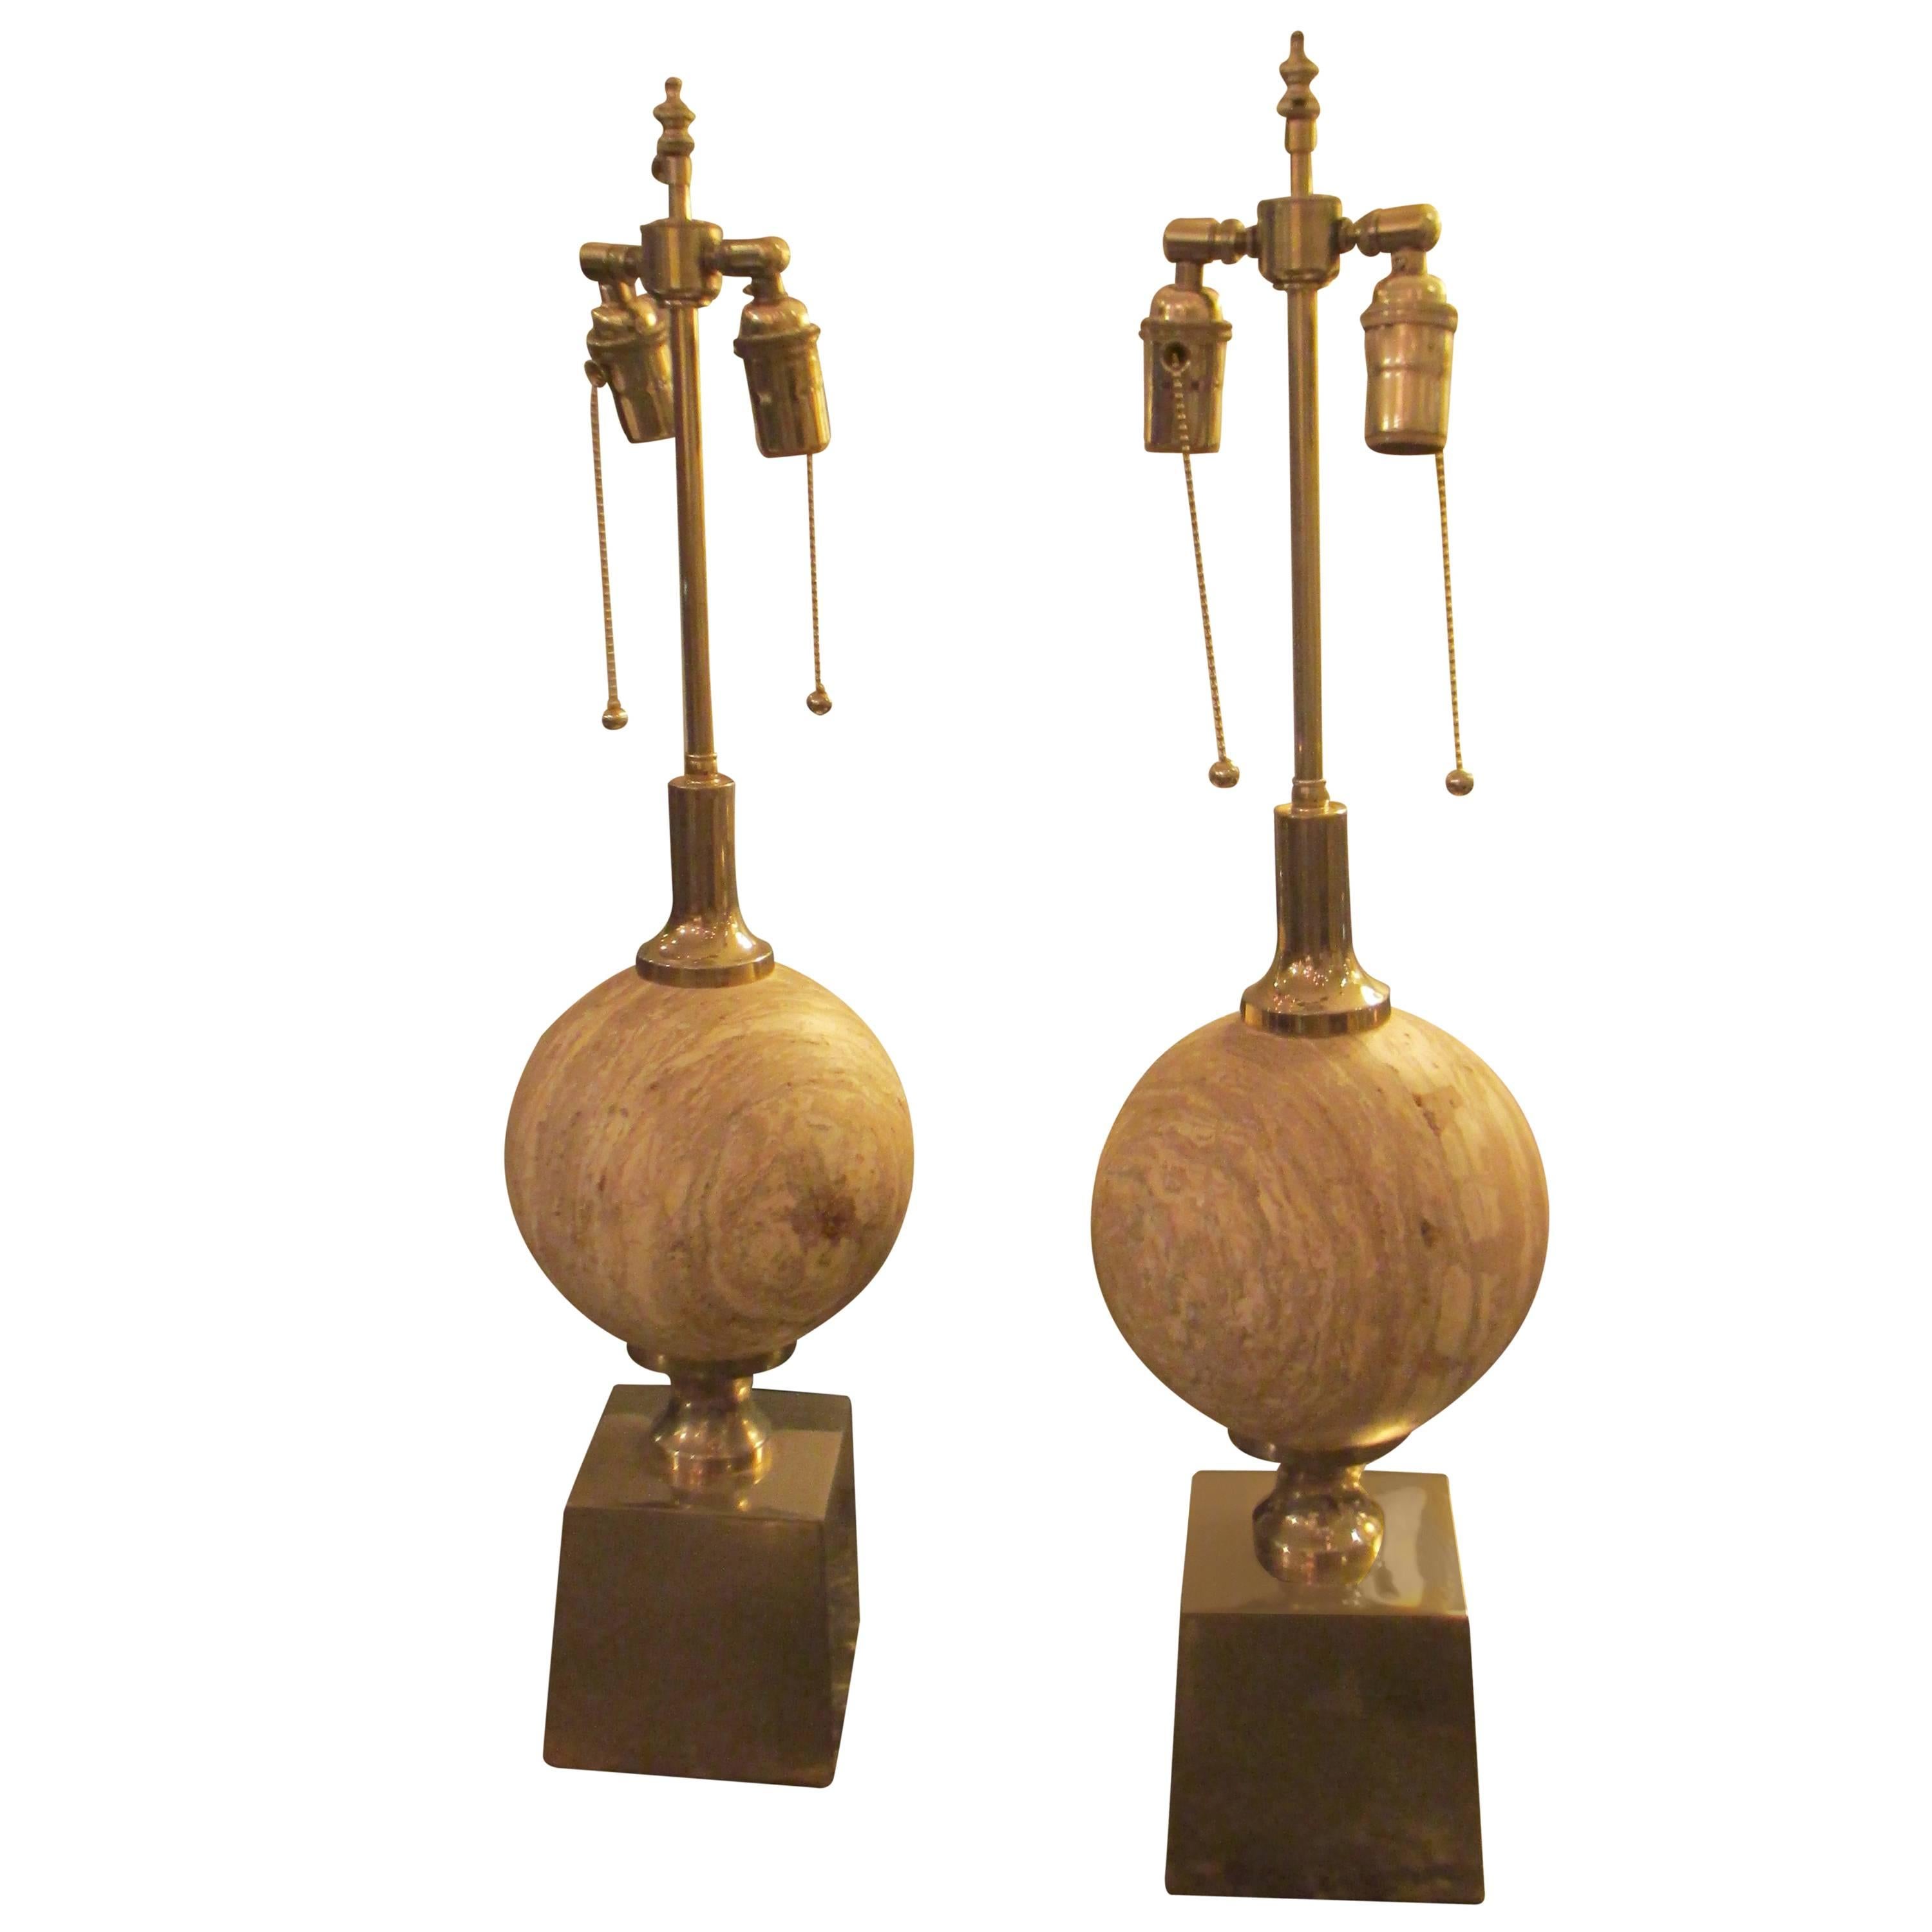 Sculptural Pair of Travertine Lamps on Chrome-Plated Plinth Bases